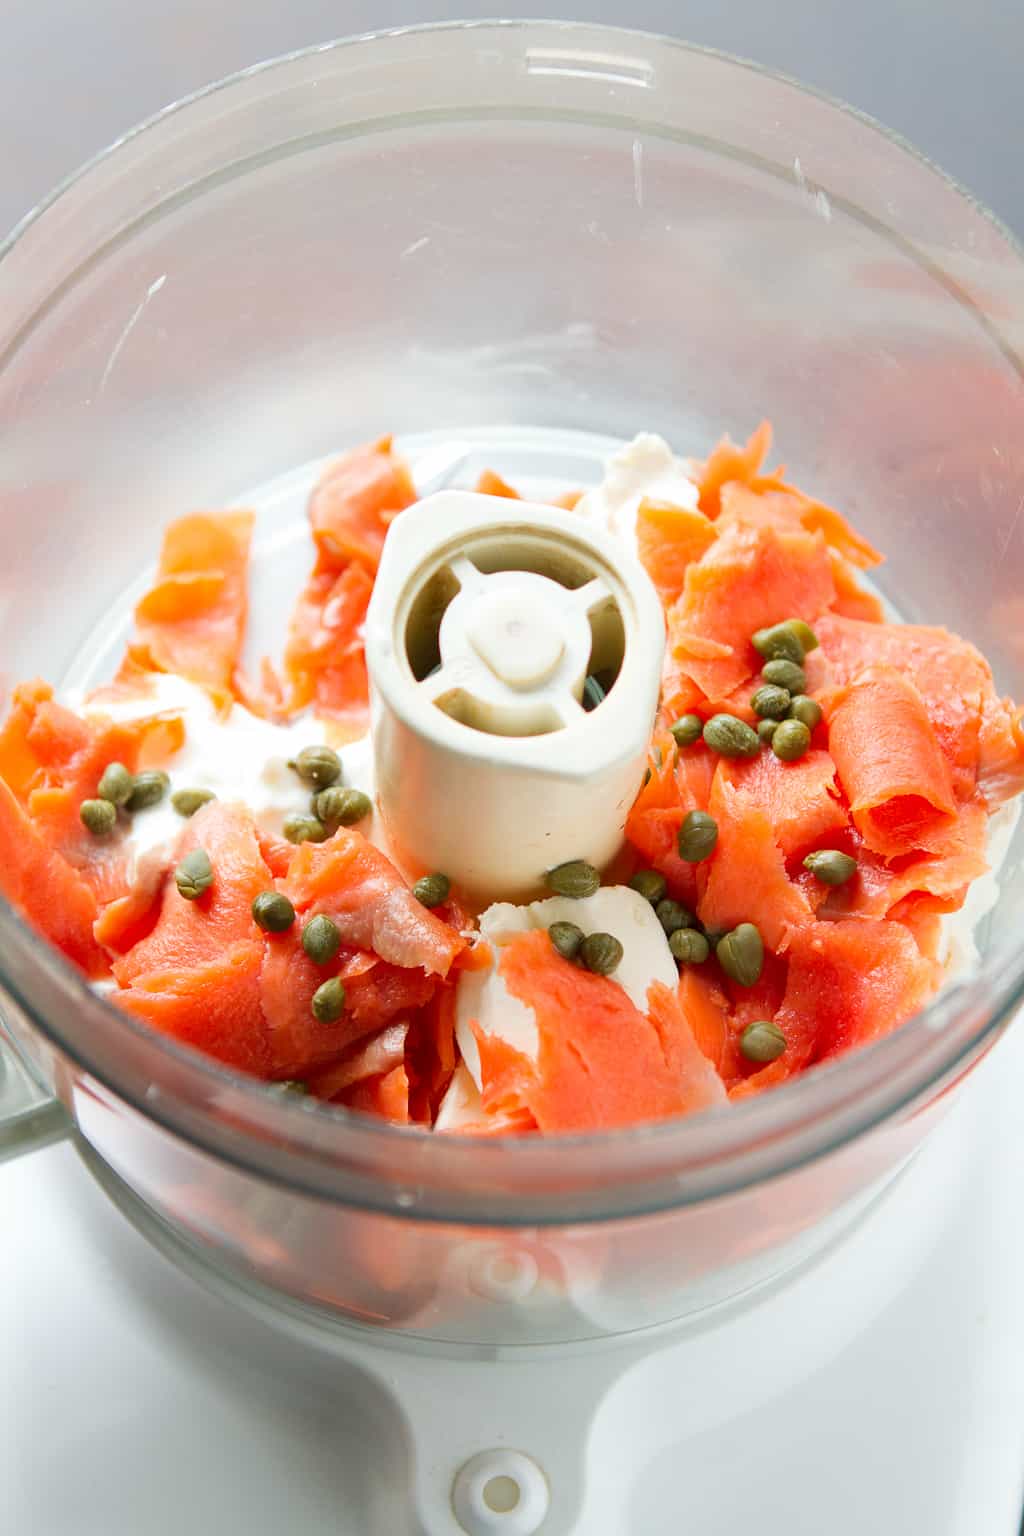 Cream cheese, smoked salmon pieces and capers in a food processor.